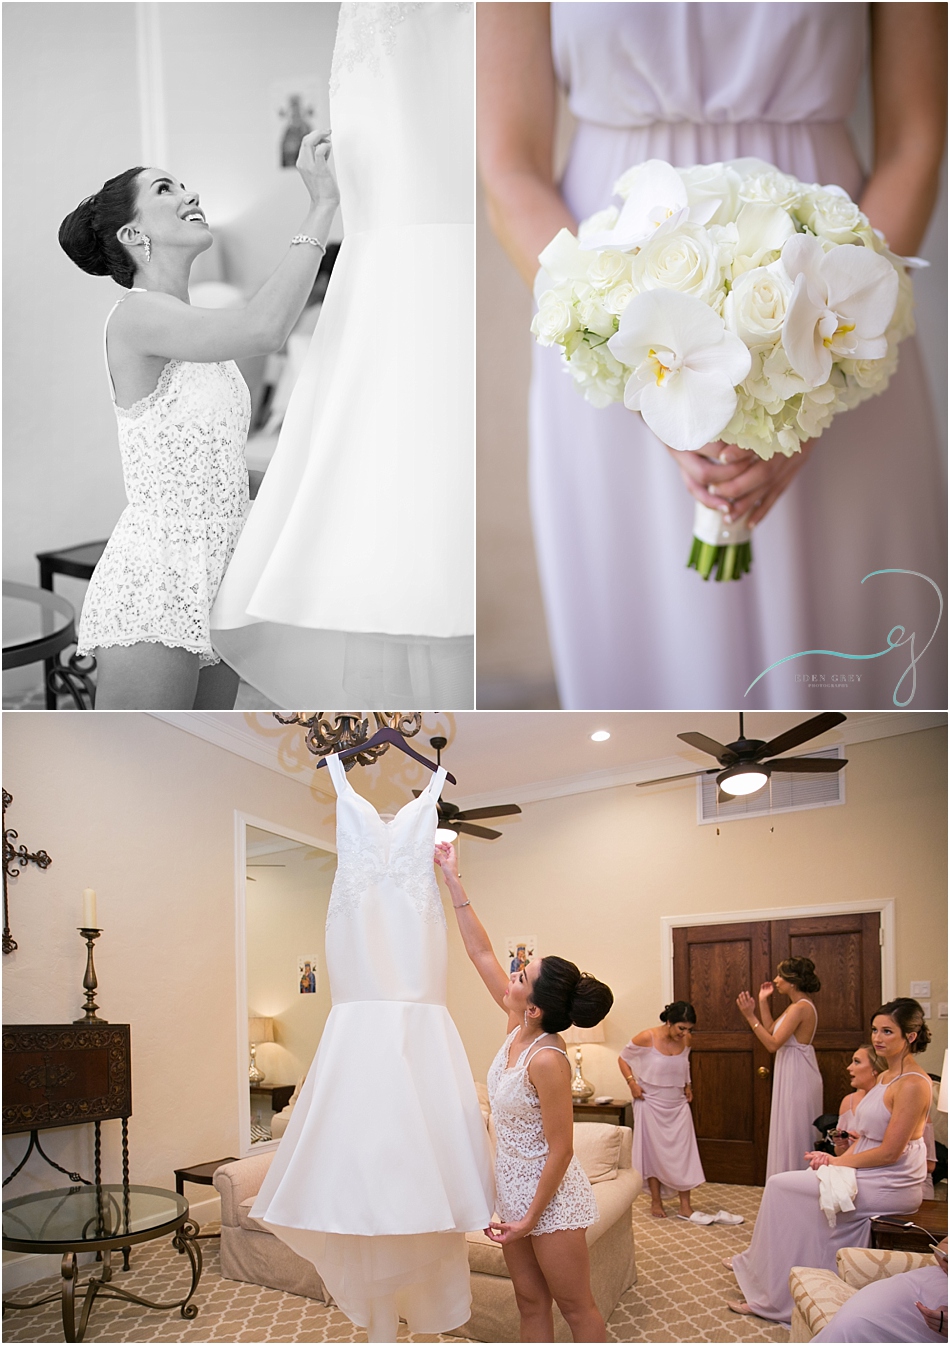 Bridal rompers and orchid bouquets